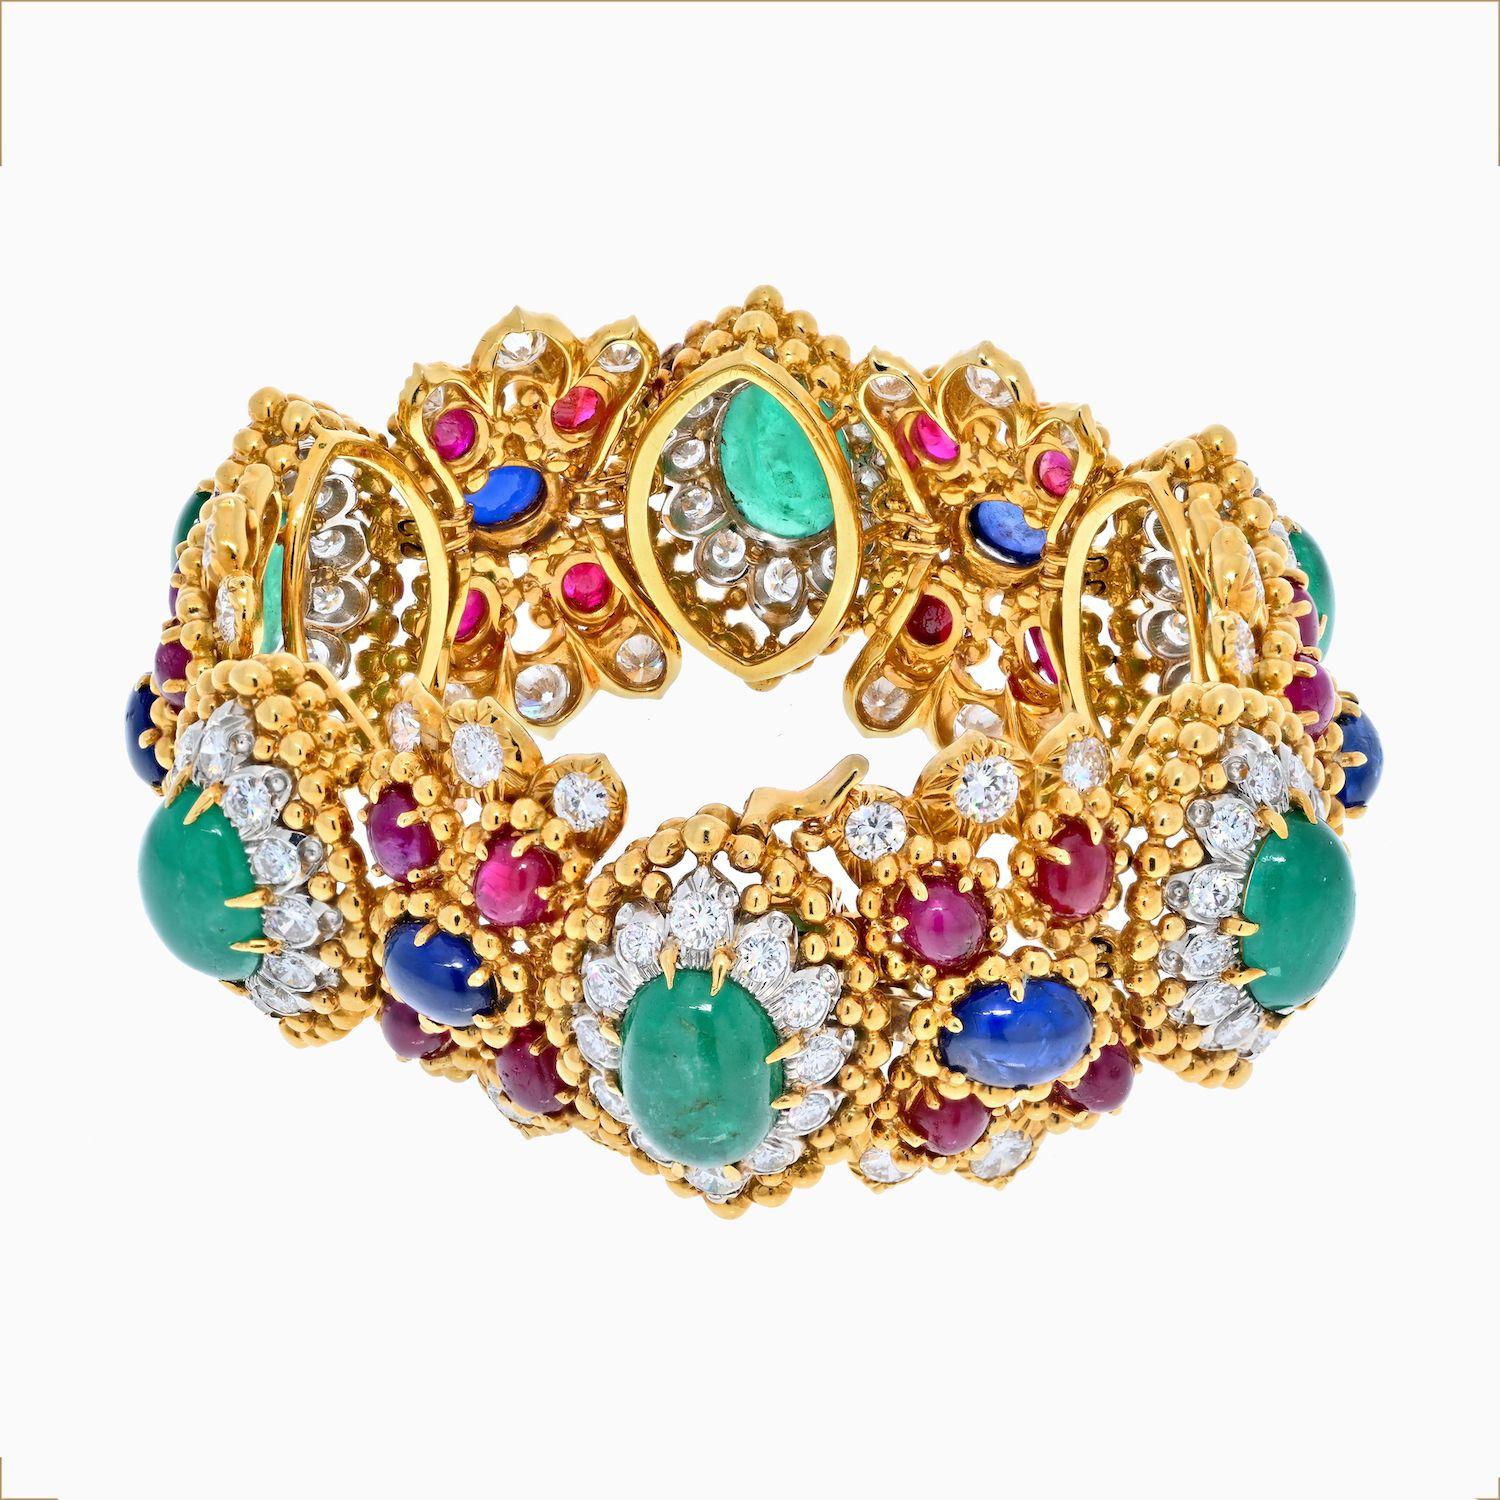 This is a spectacular and exciting David Webb 18K Yellow Gold gemstone bracelet with diamonds. The gemstones include emeralds, sapphires, and rubies that are further decorated with diamonds. Gems are of cabochon cut and form a floral layout